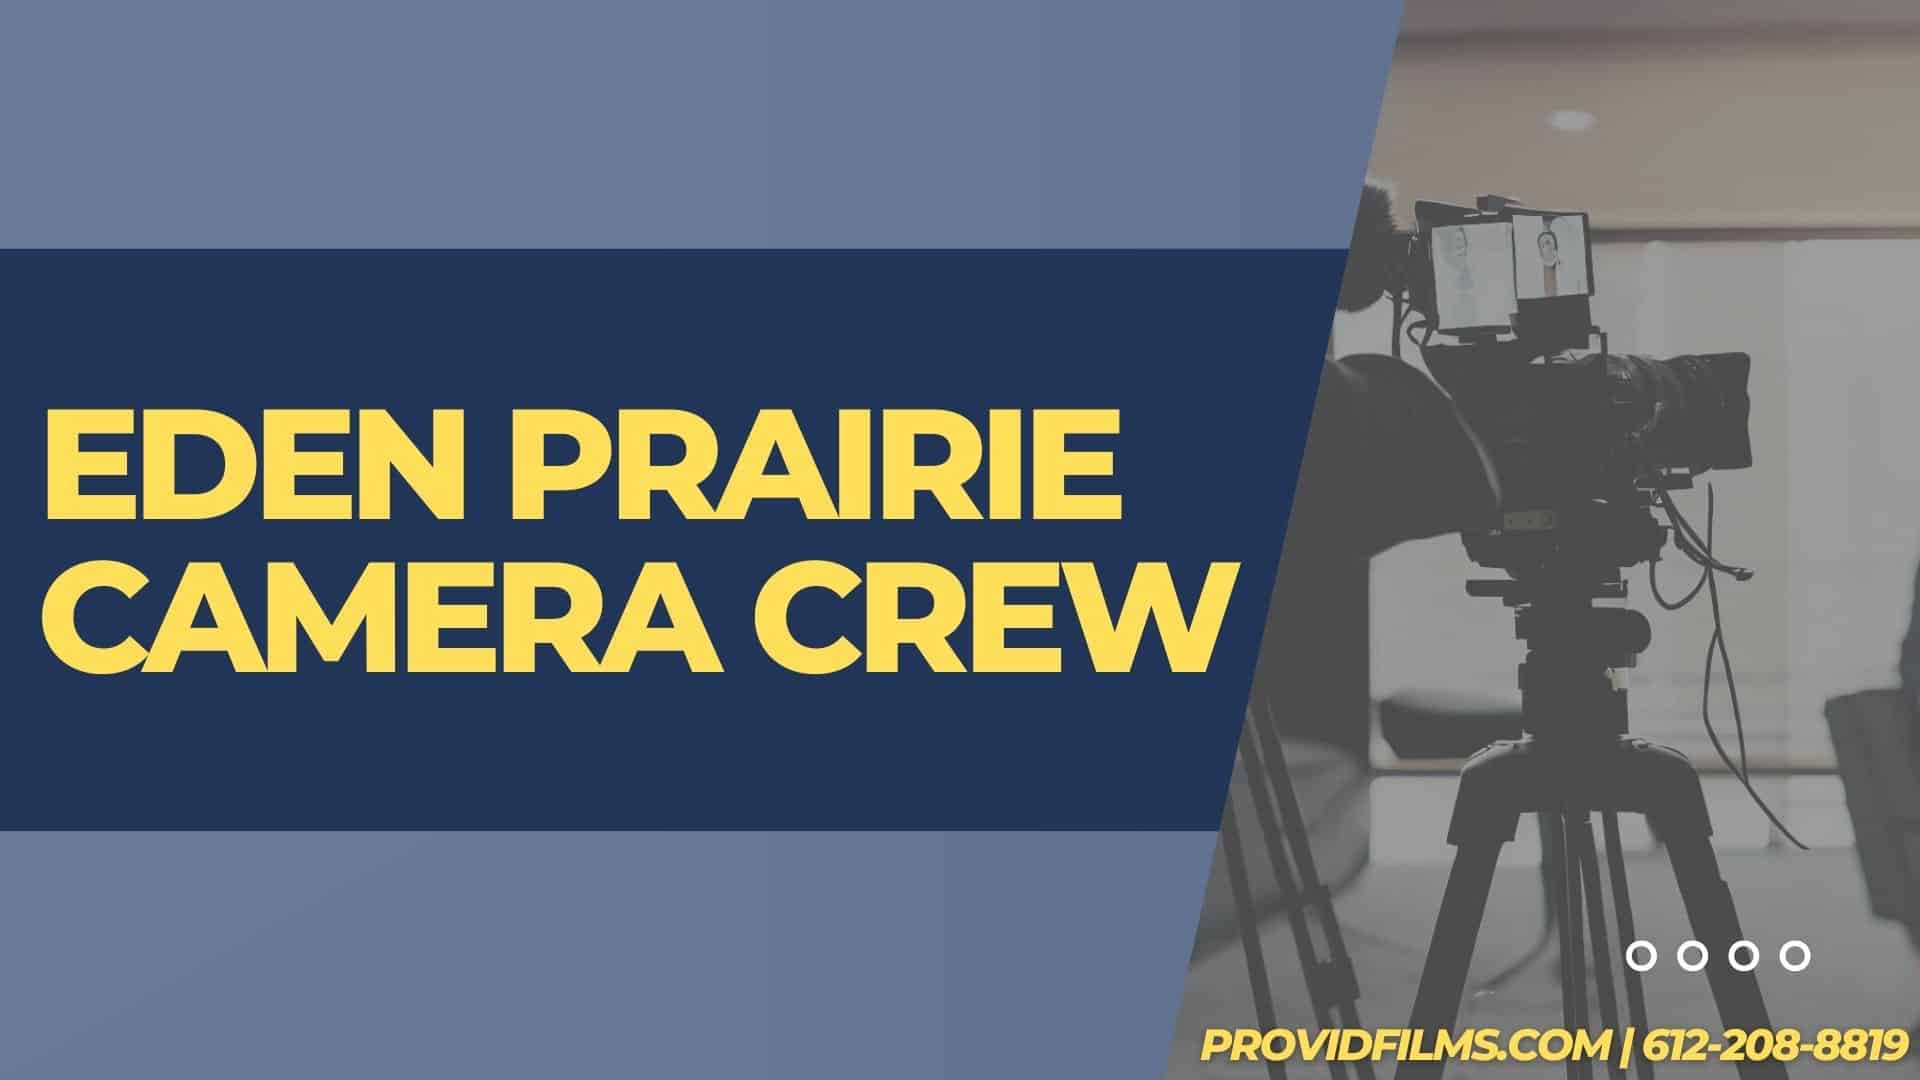 Graphic of a video camera with the text saying "Eden Prairie Camera Crew"